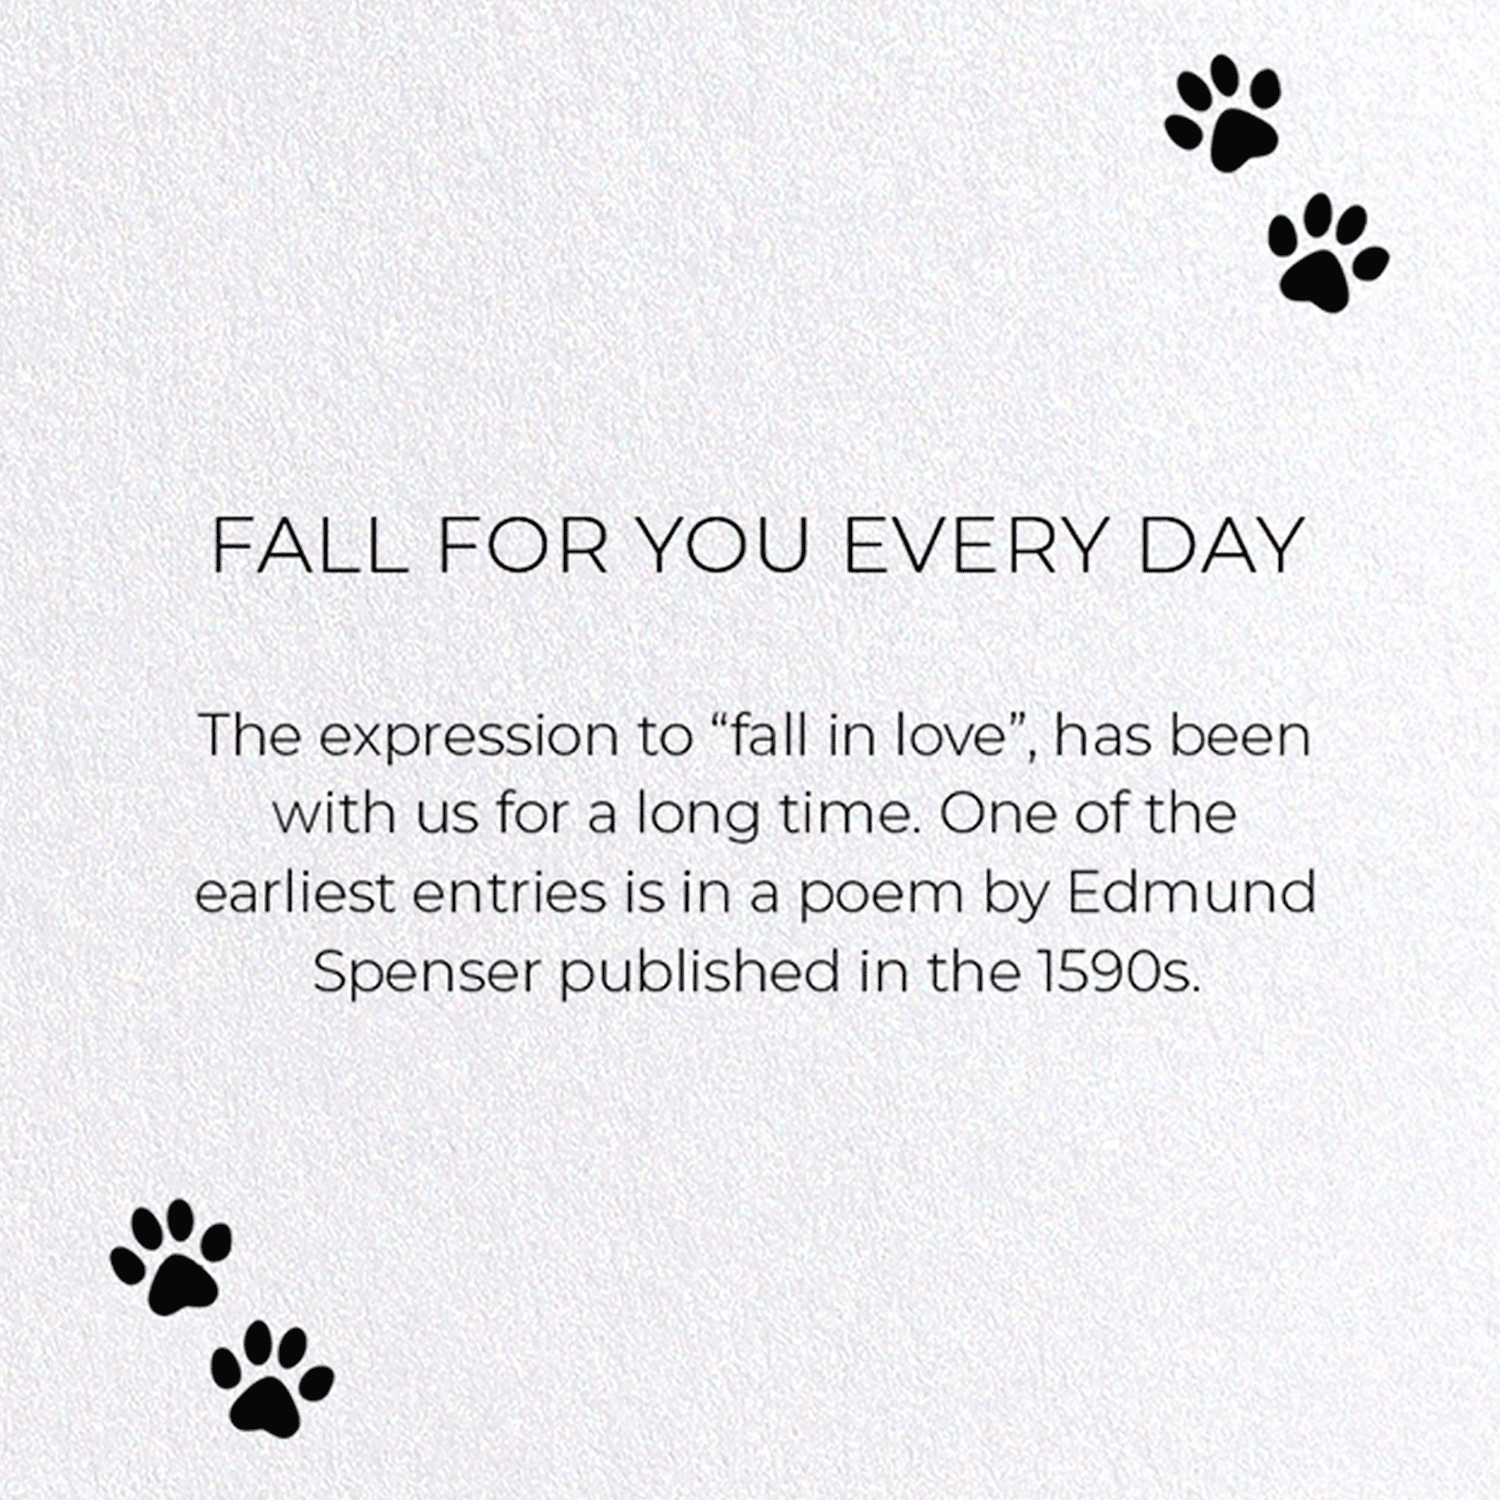 FALL FOR YOU EVERY DAY